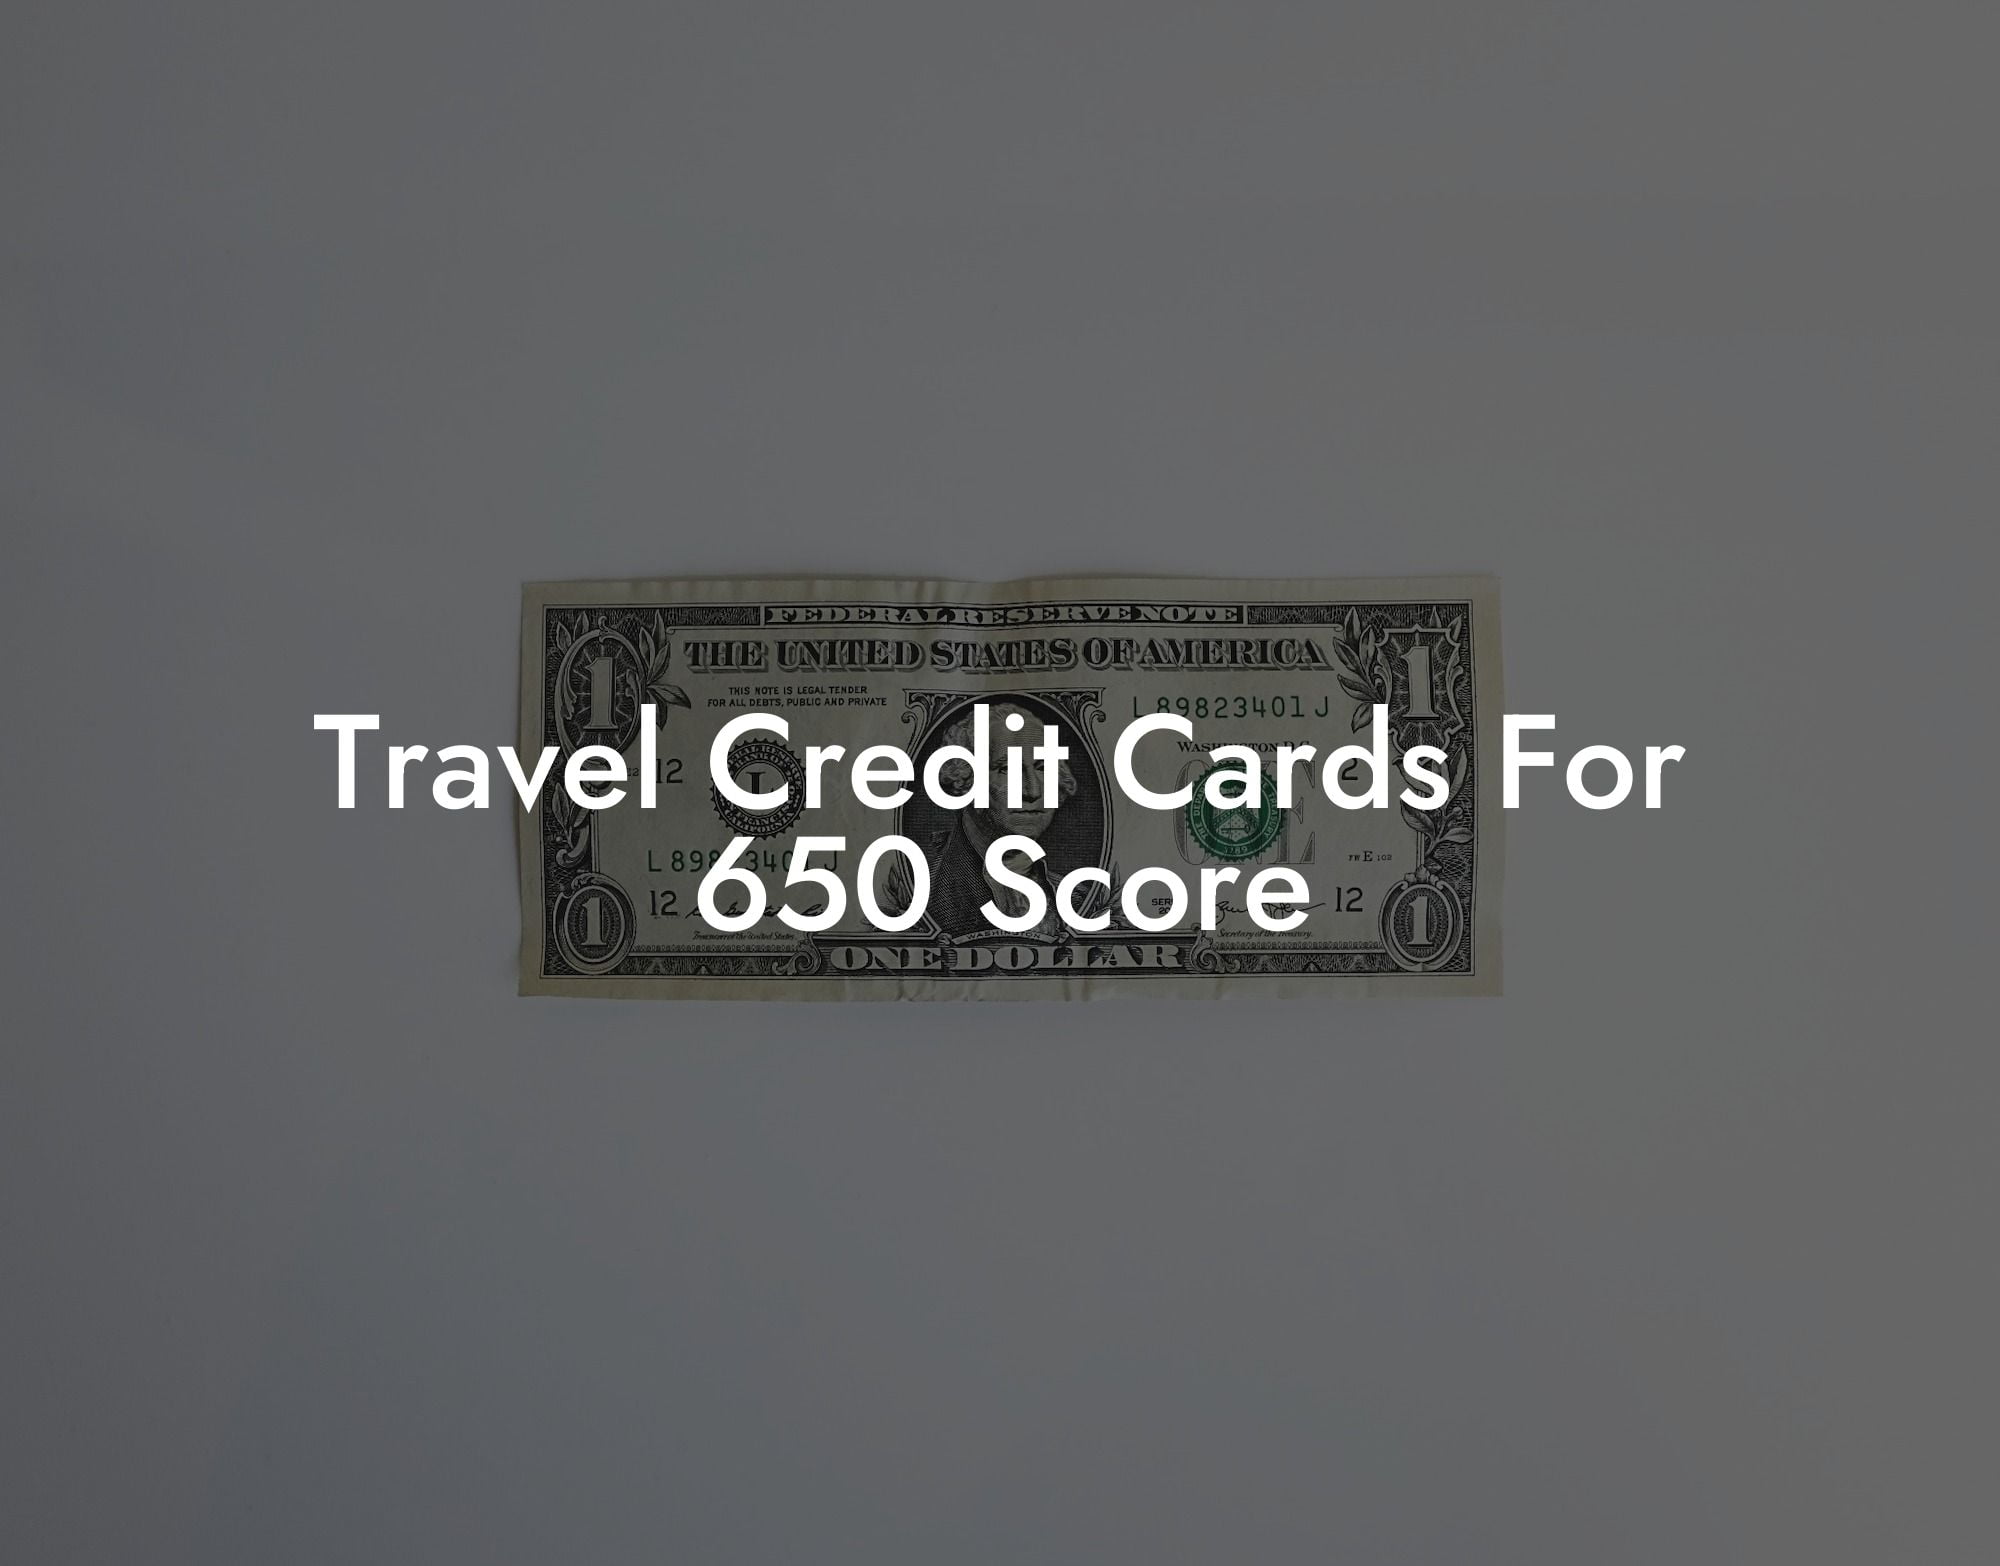 Travel Credit Cards For 650 Score